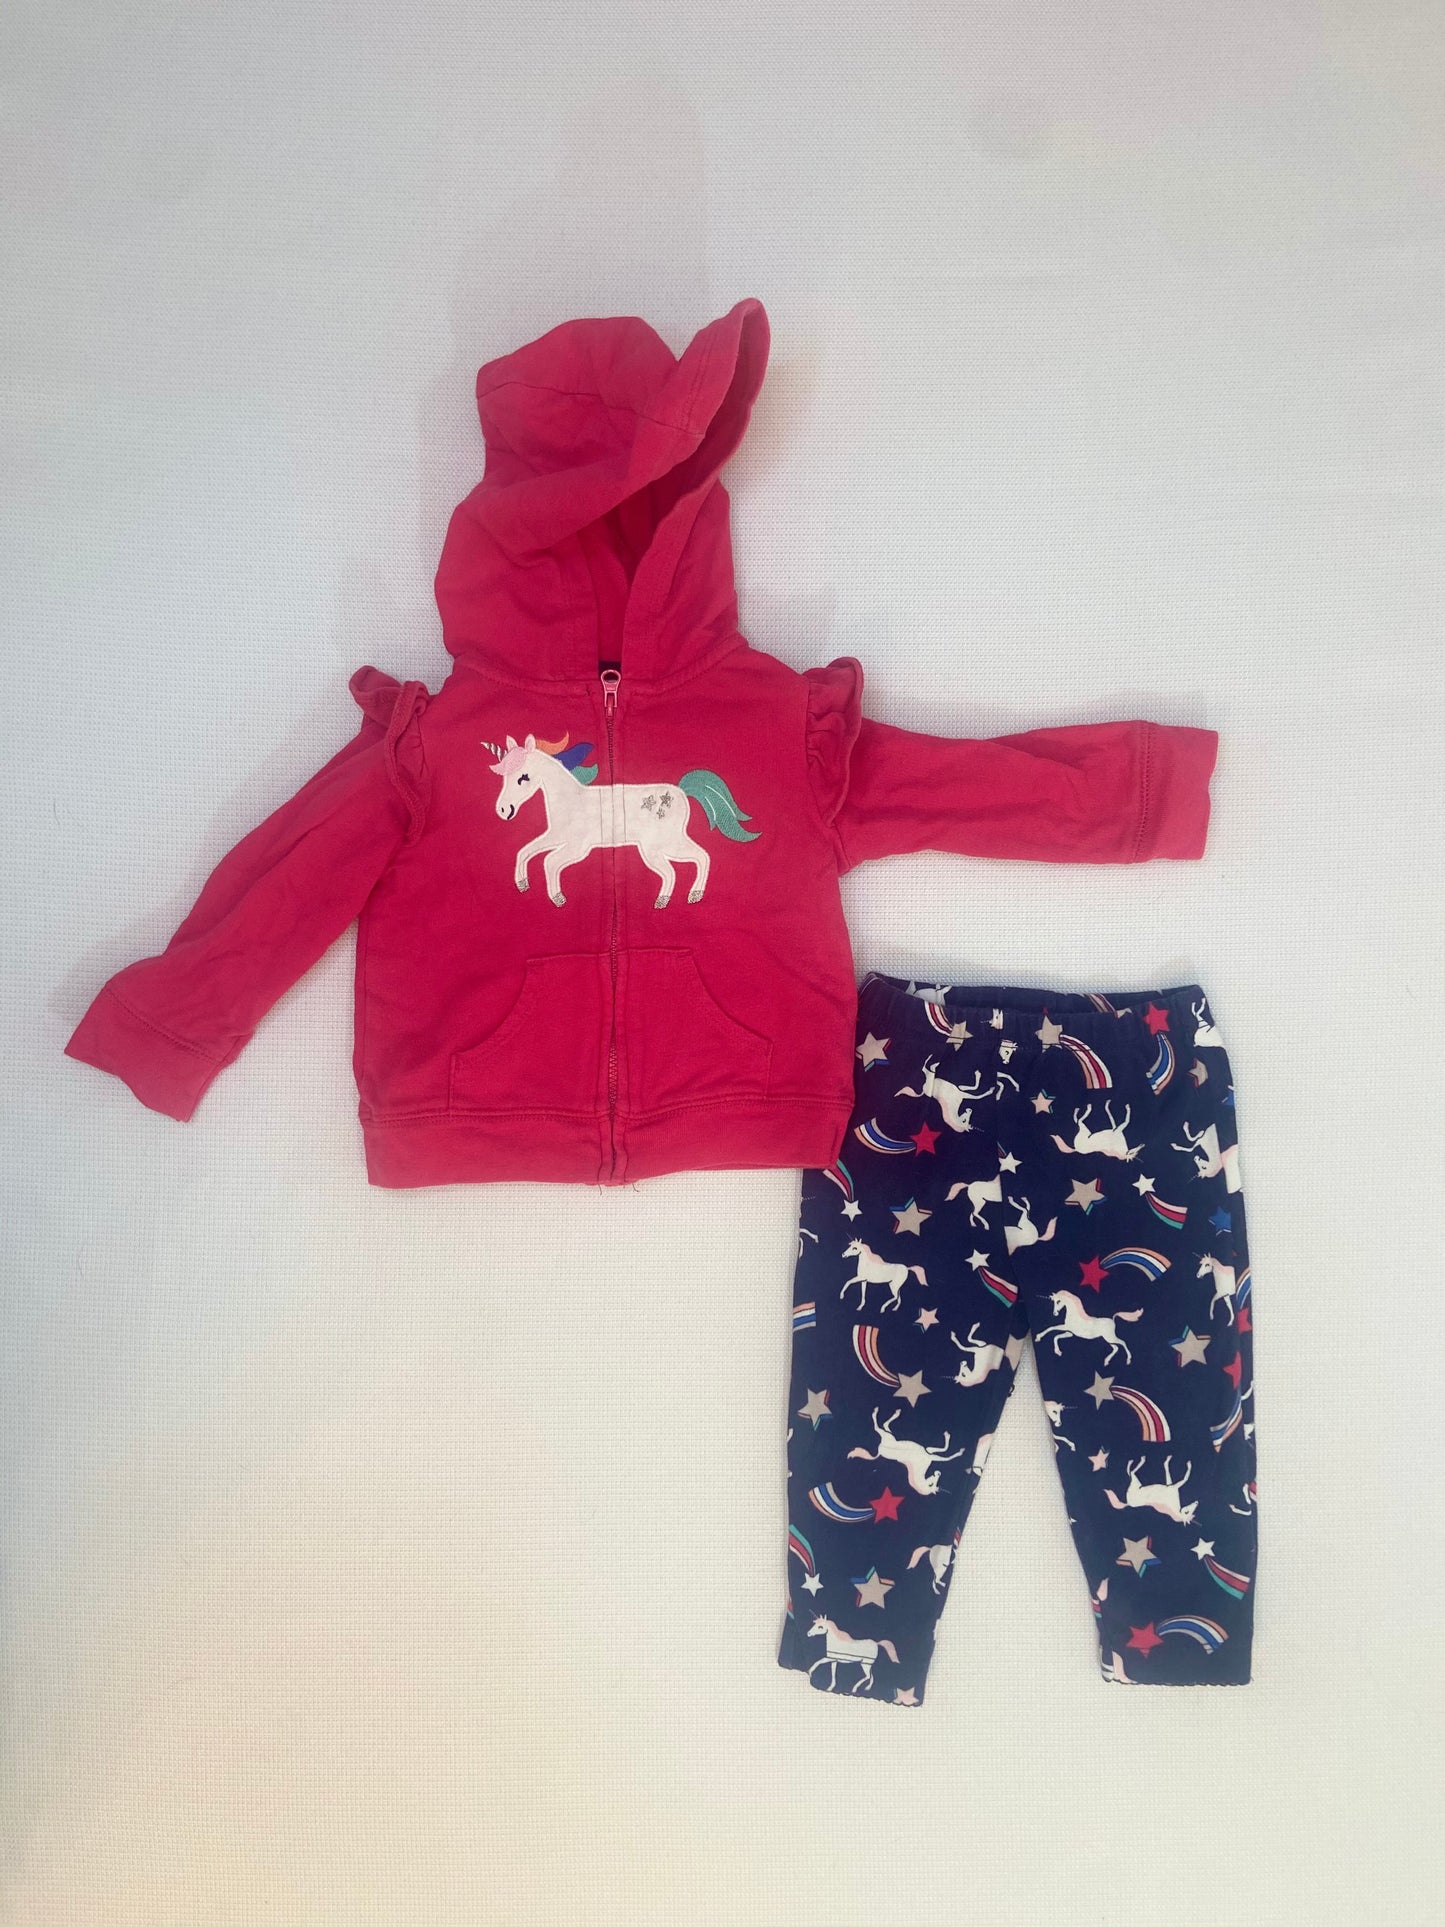 Unicorn Two Piece Outfit- 9 Months